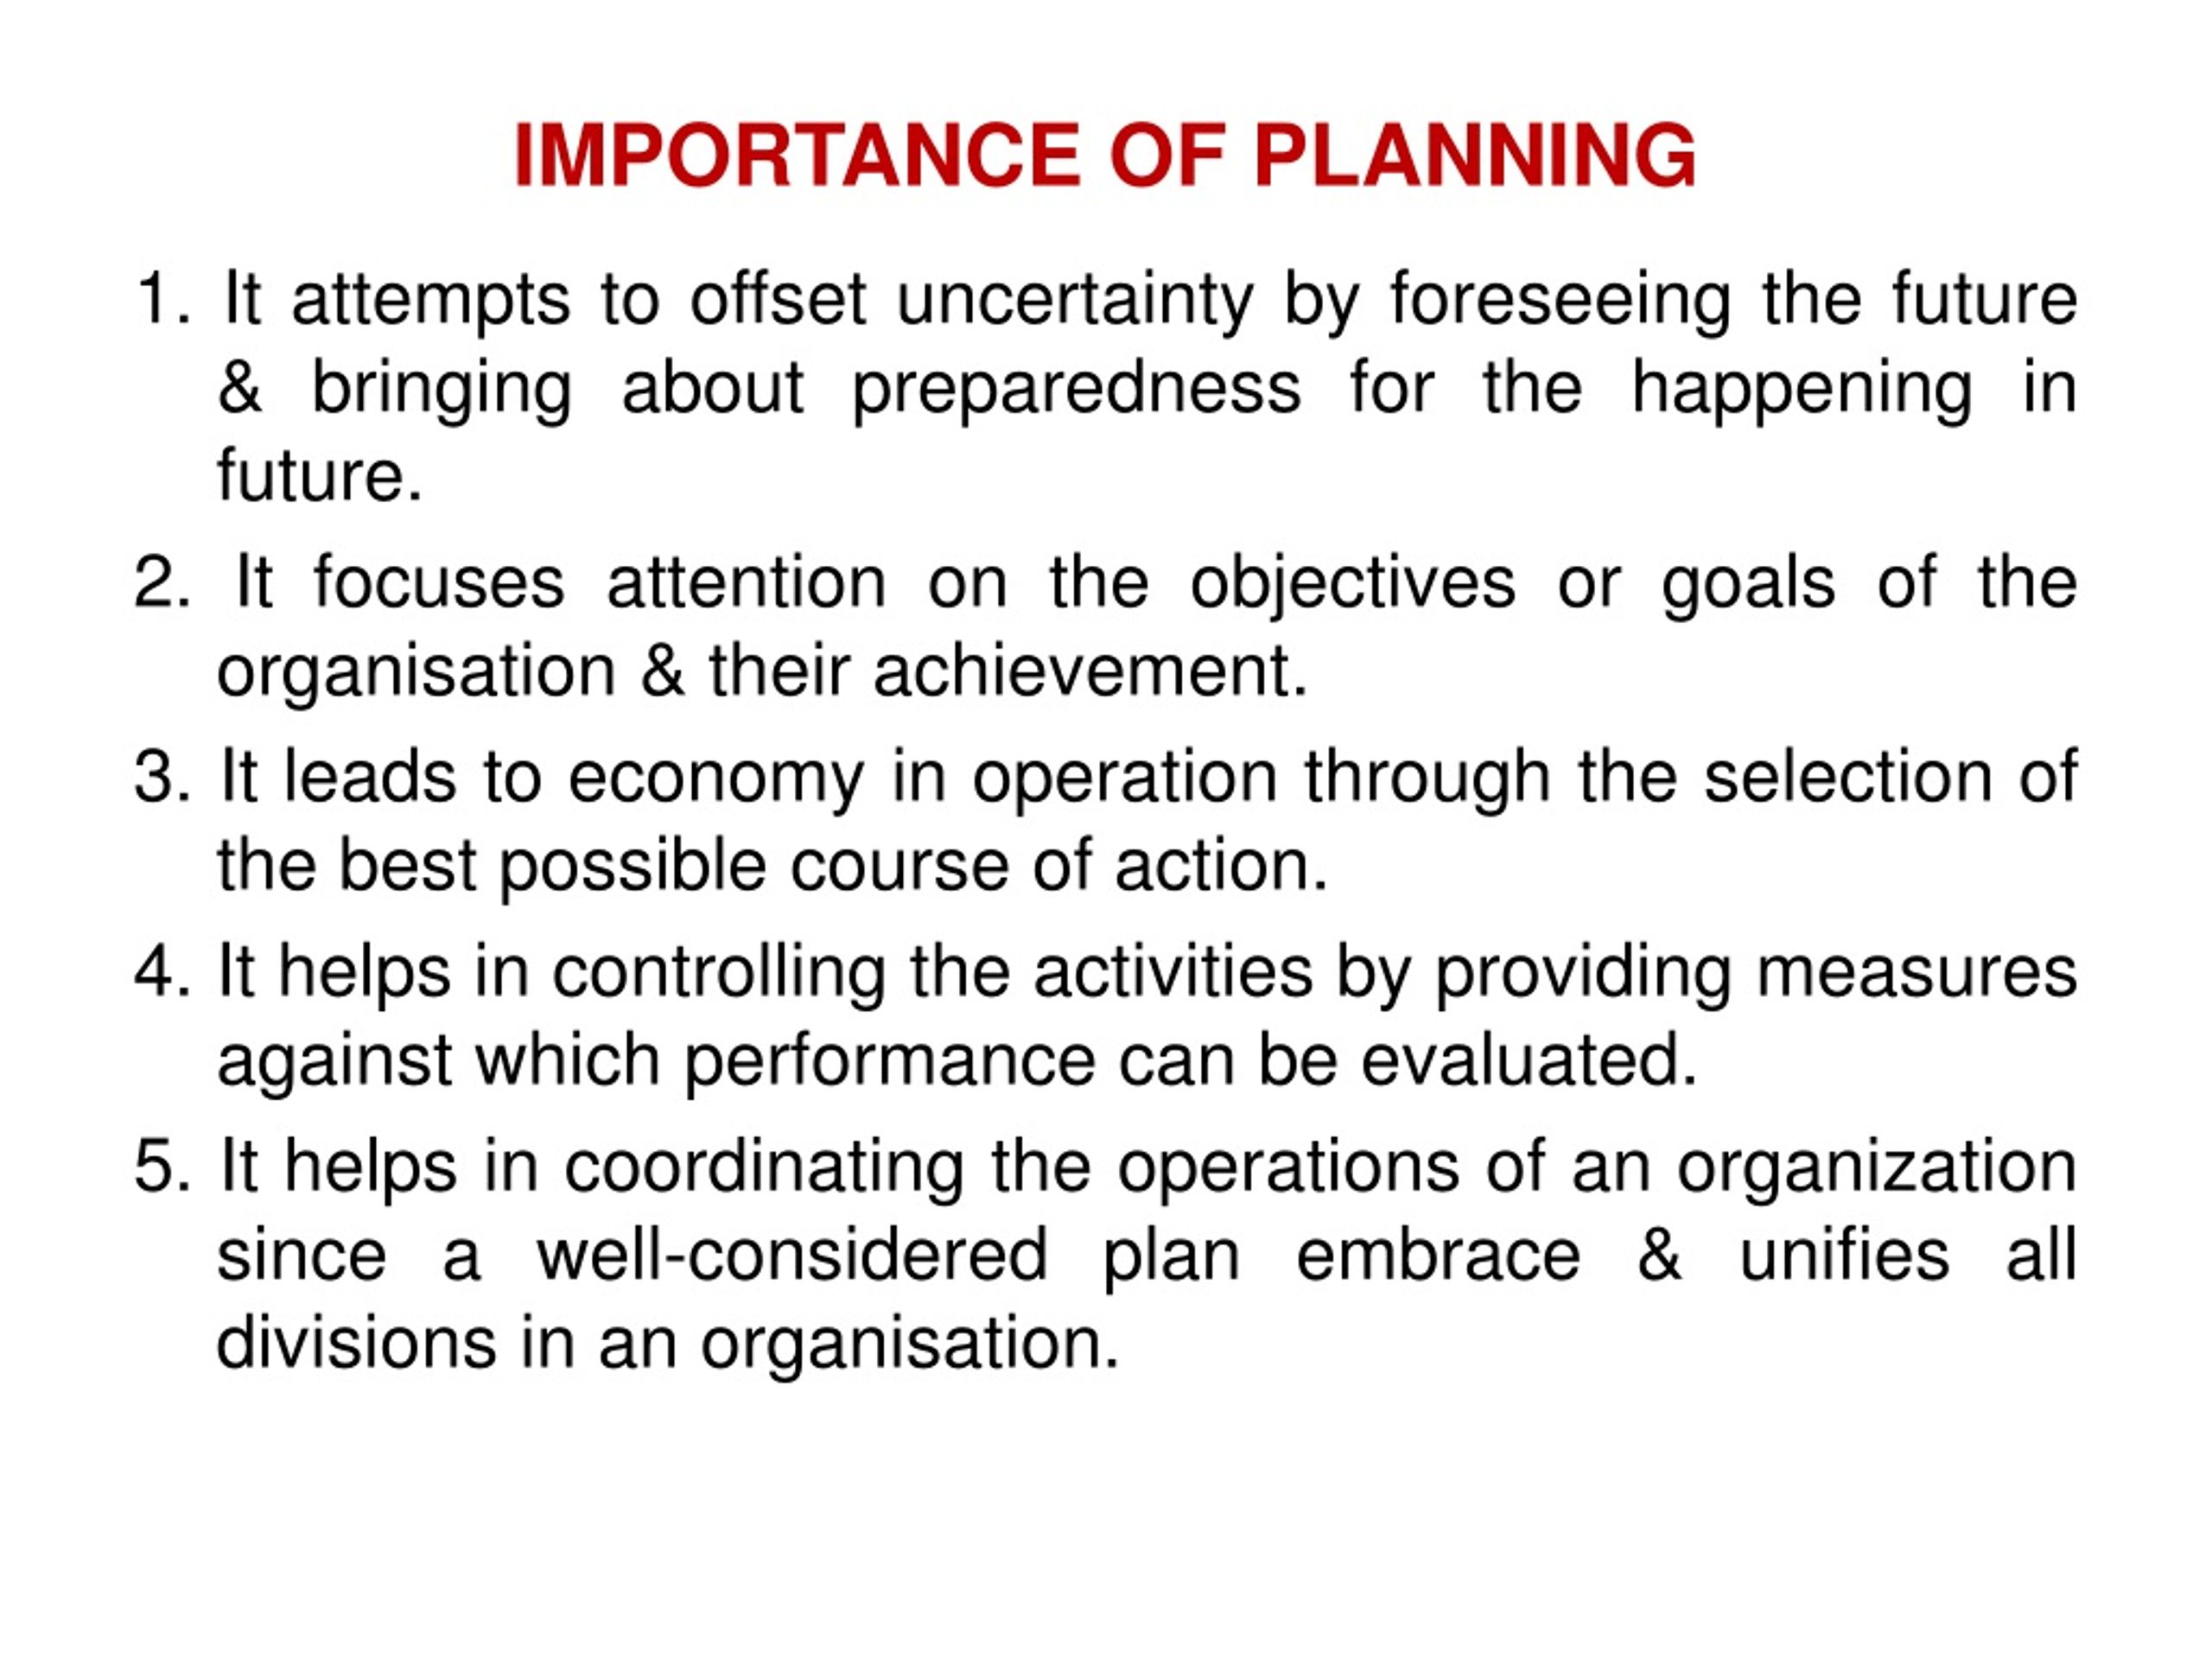 case study on importance of planning